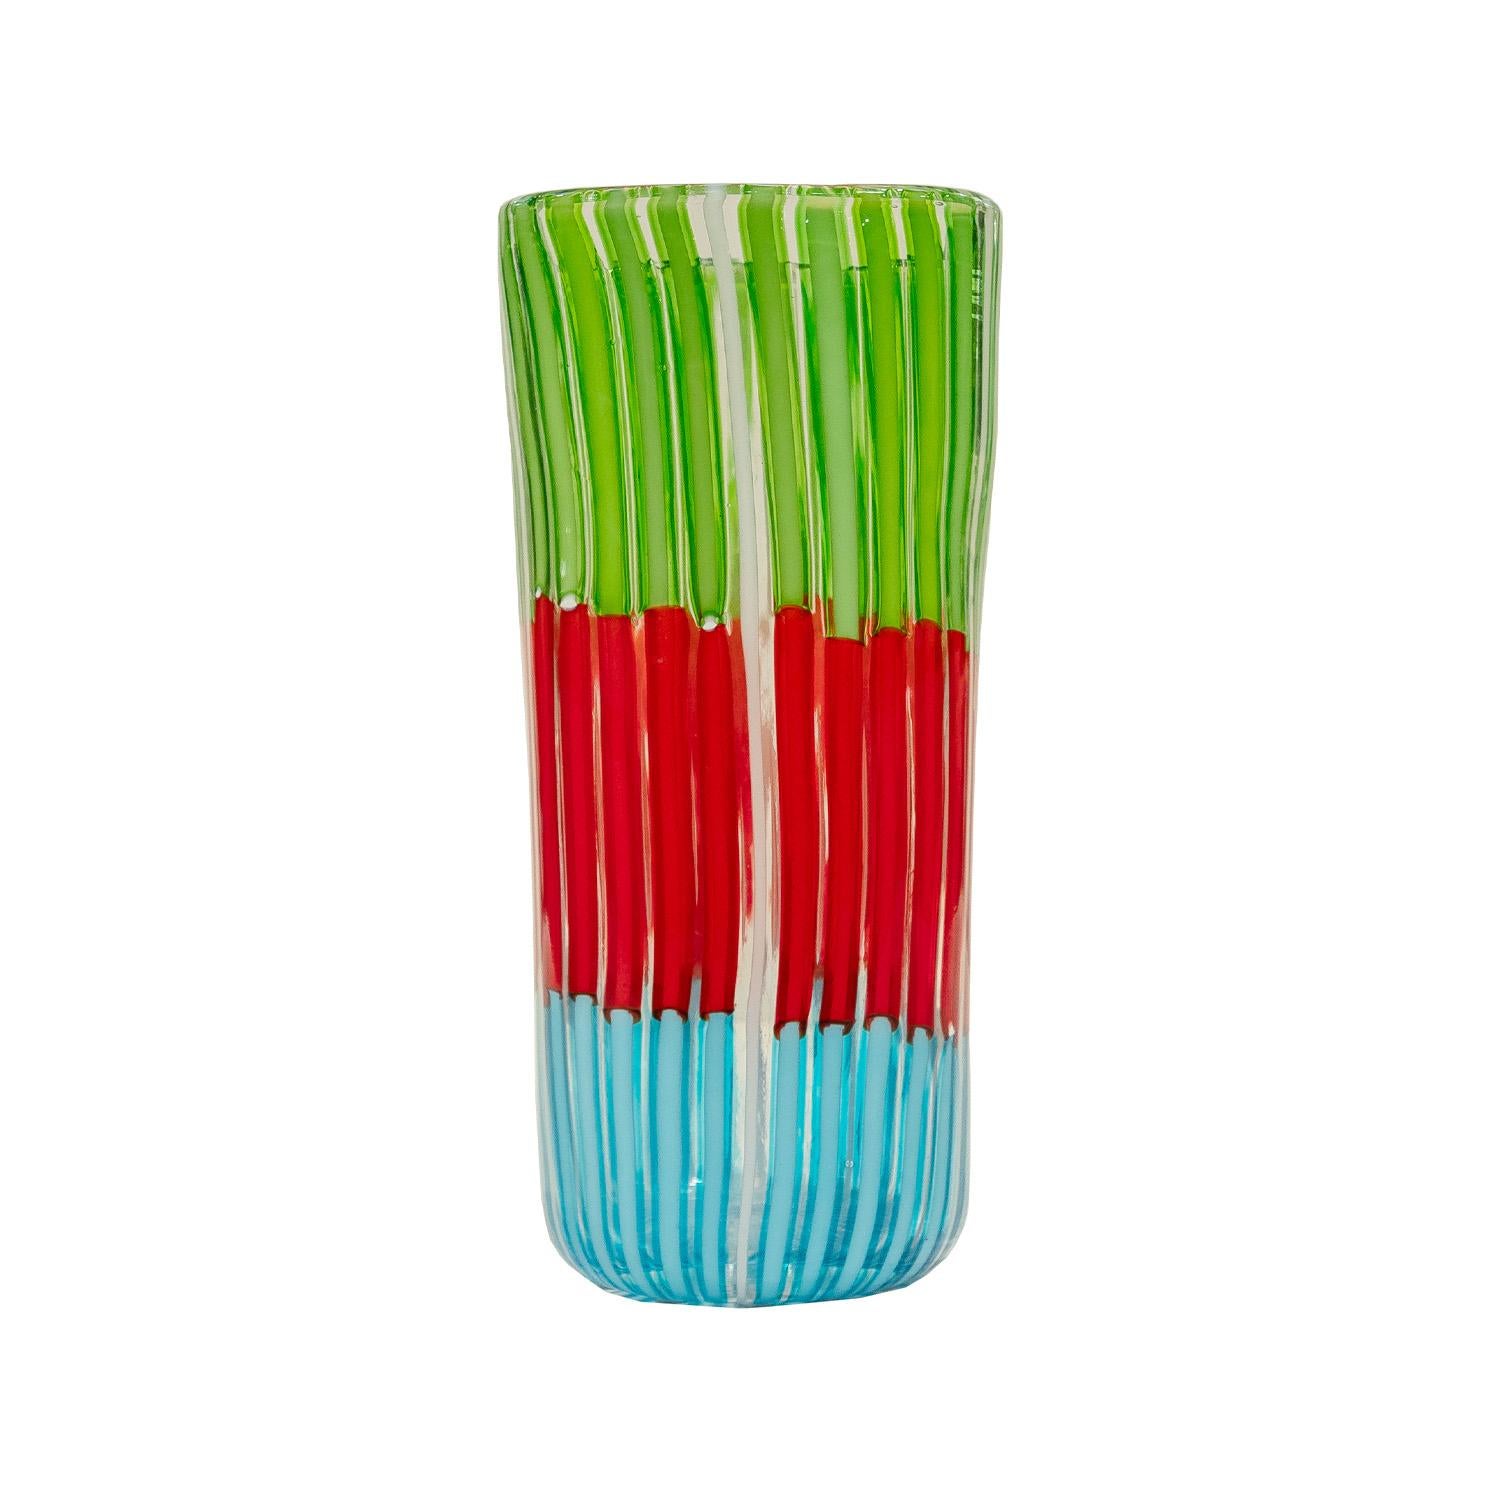 Hand-blown glass vase from the Bandiere Series with multicolor vertical rods by Anzolo Fuga for AVEM (Arte Vetraria Muranese), Murano Italy, 1955-6.  The clear and white rods interspersed among the colored rods creates a very striking design. 